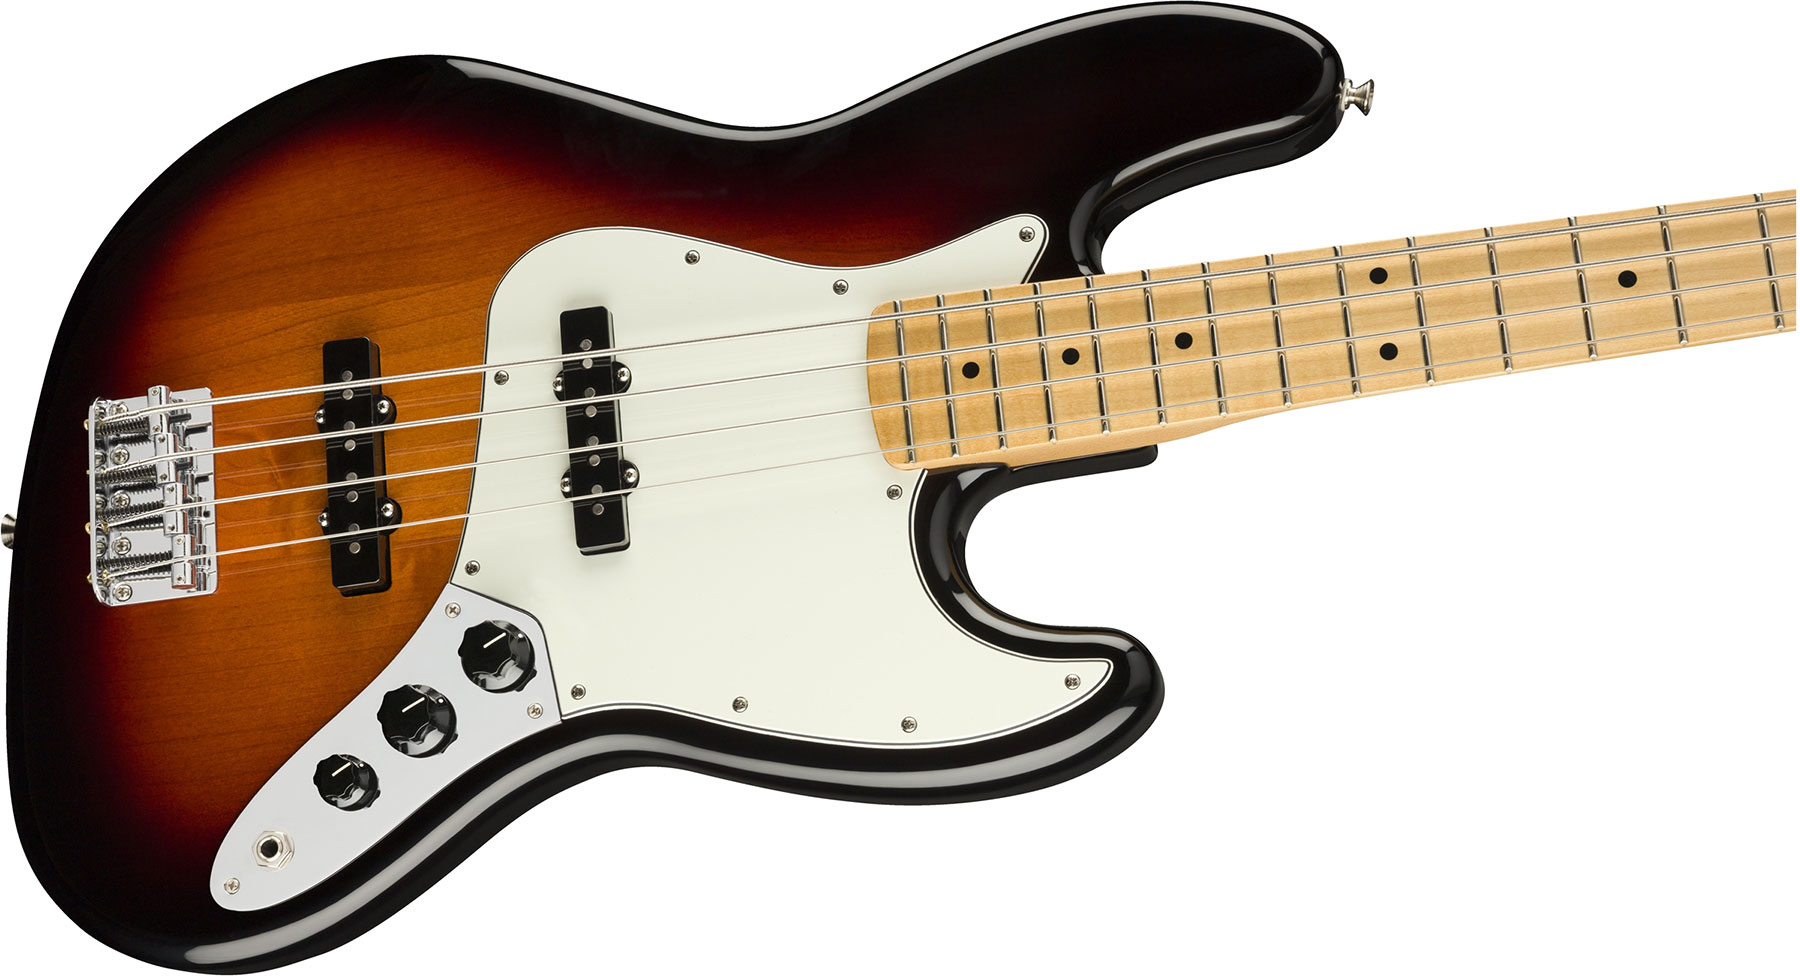 Fender Jazz Bass Player Mex Mn - 3-color Sunburst - Solid body electric bass - Variation 2